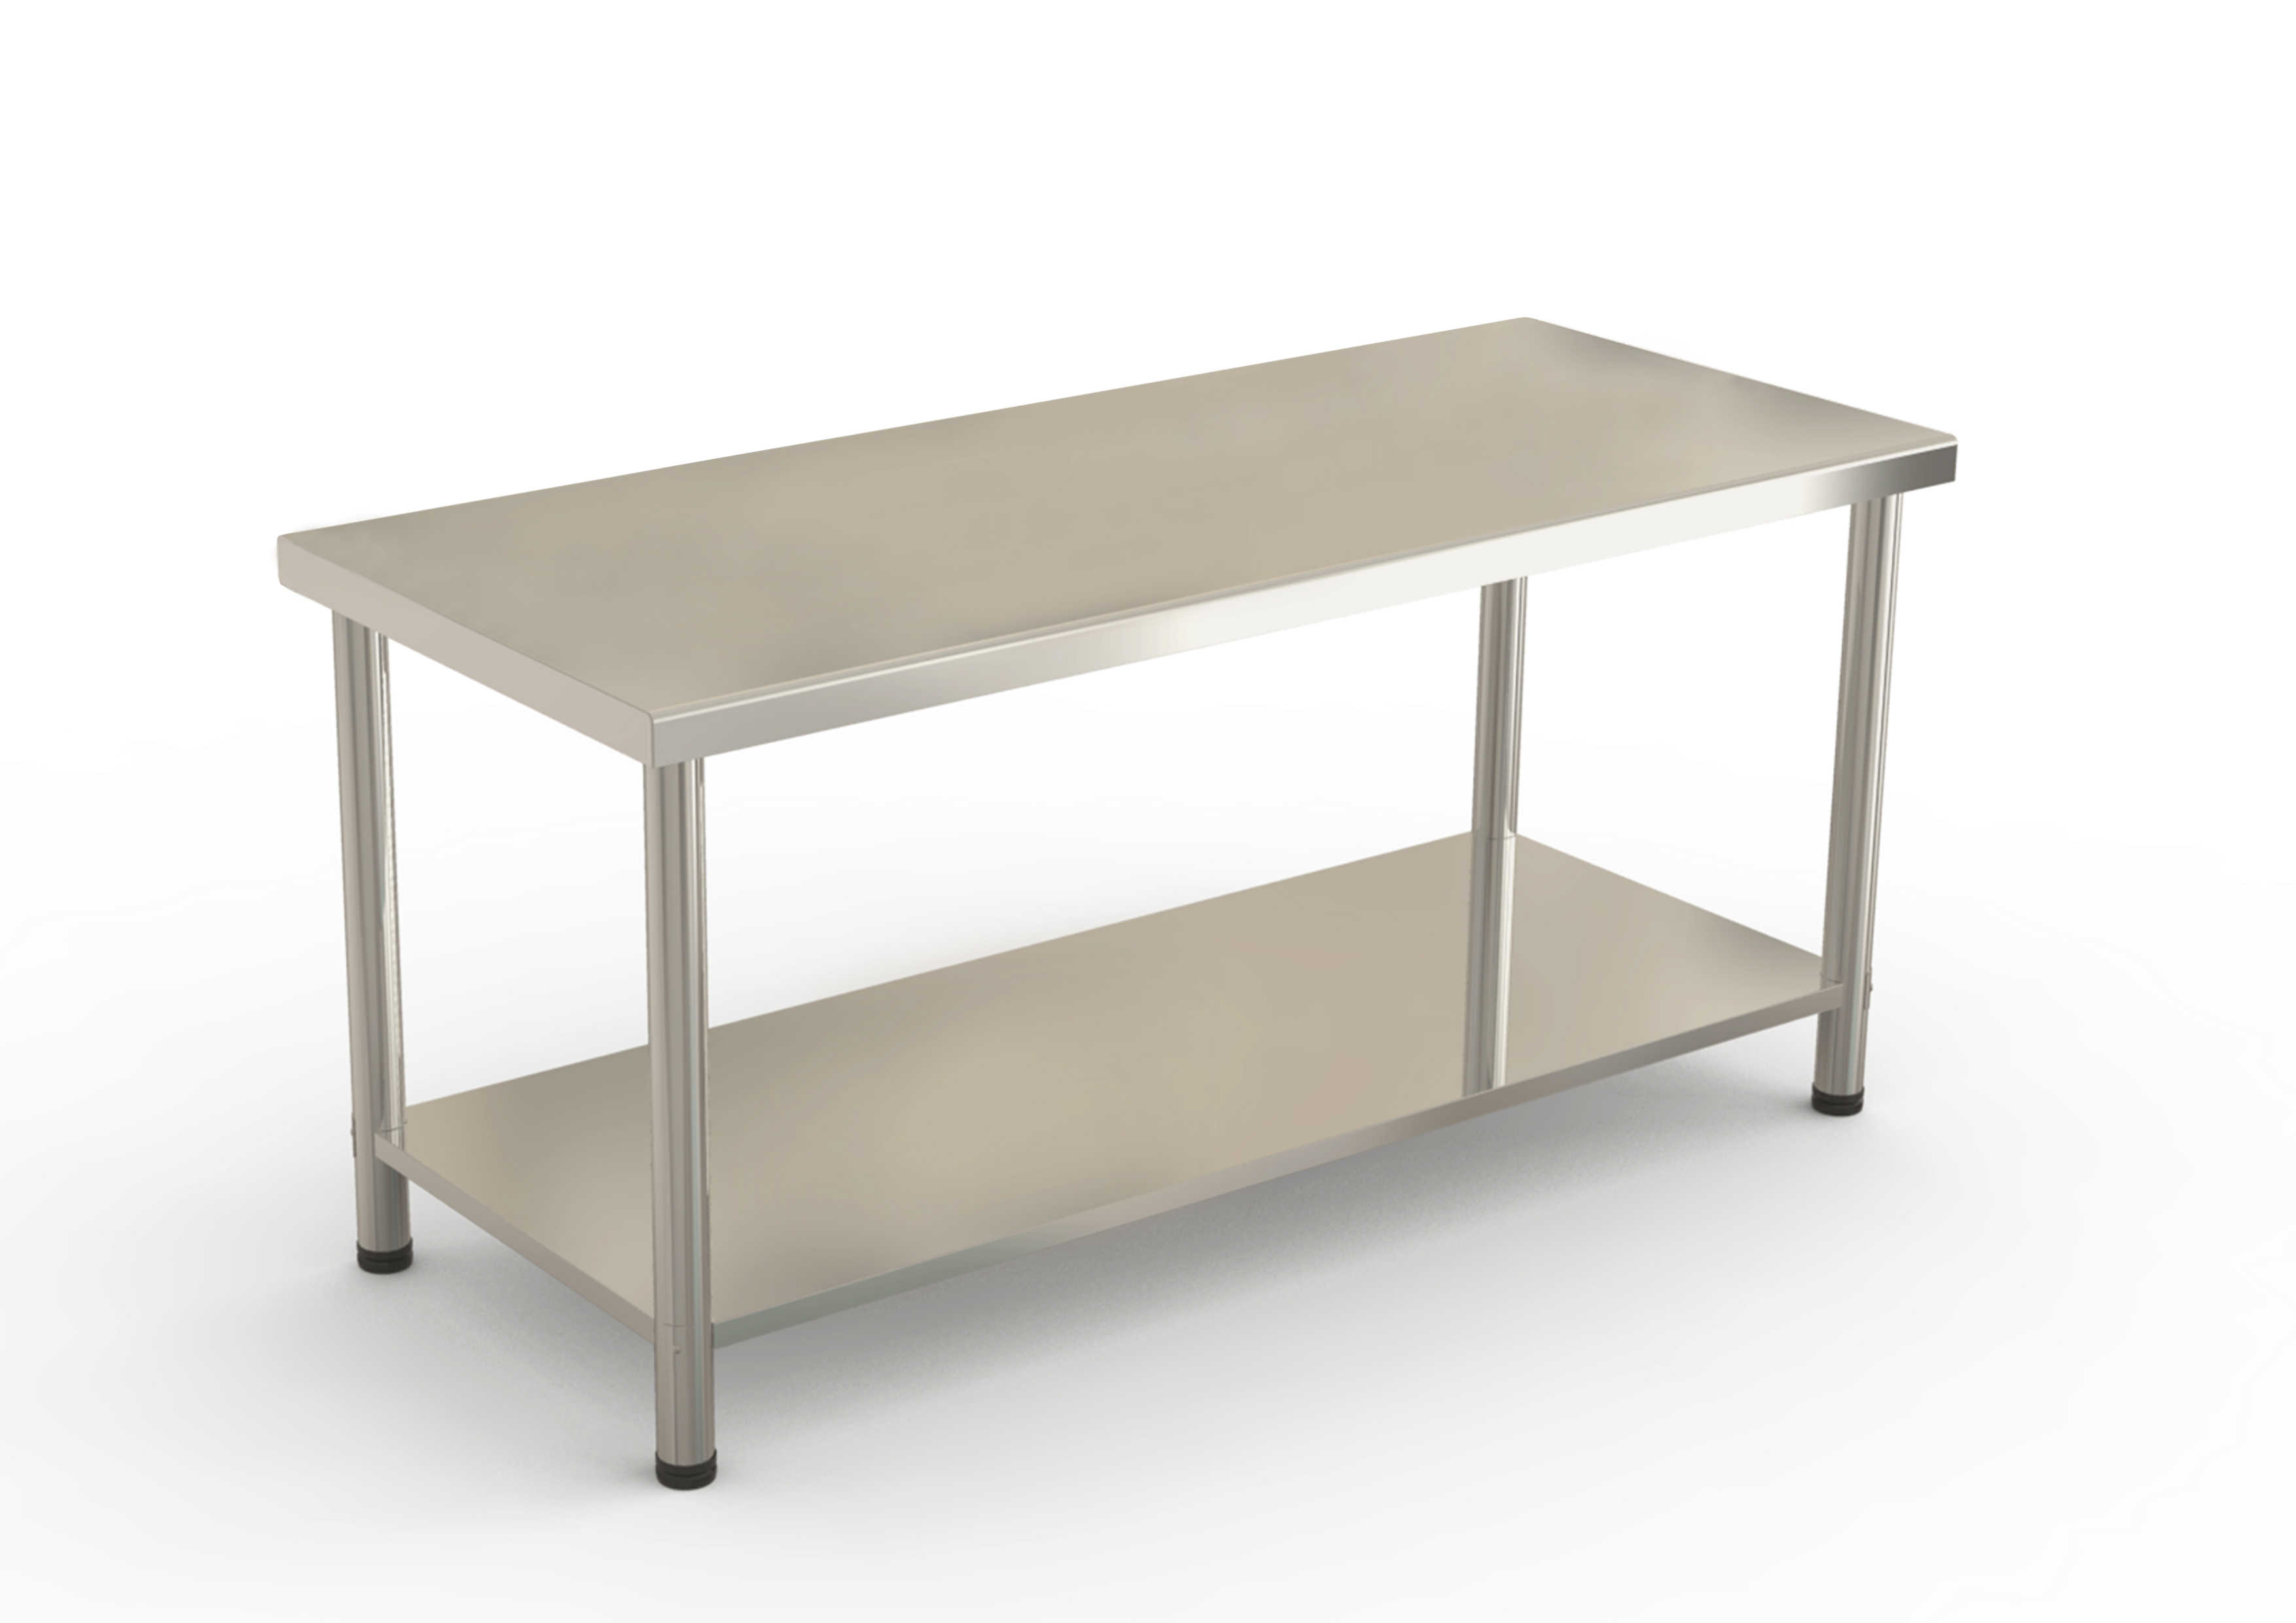 Zimtown Heavy Duty Stainless Steel Work Table Bench for Commercial Home Kitchen Prepare and Casters, 72 in. x 24 in.